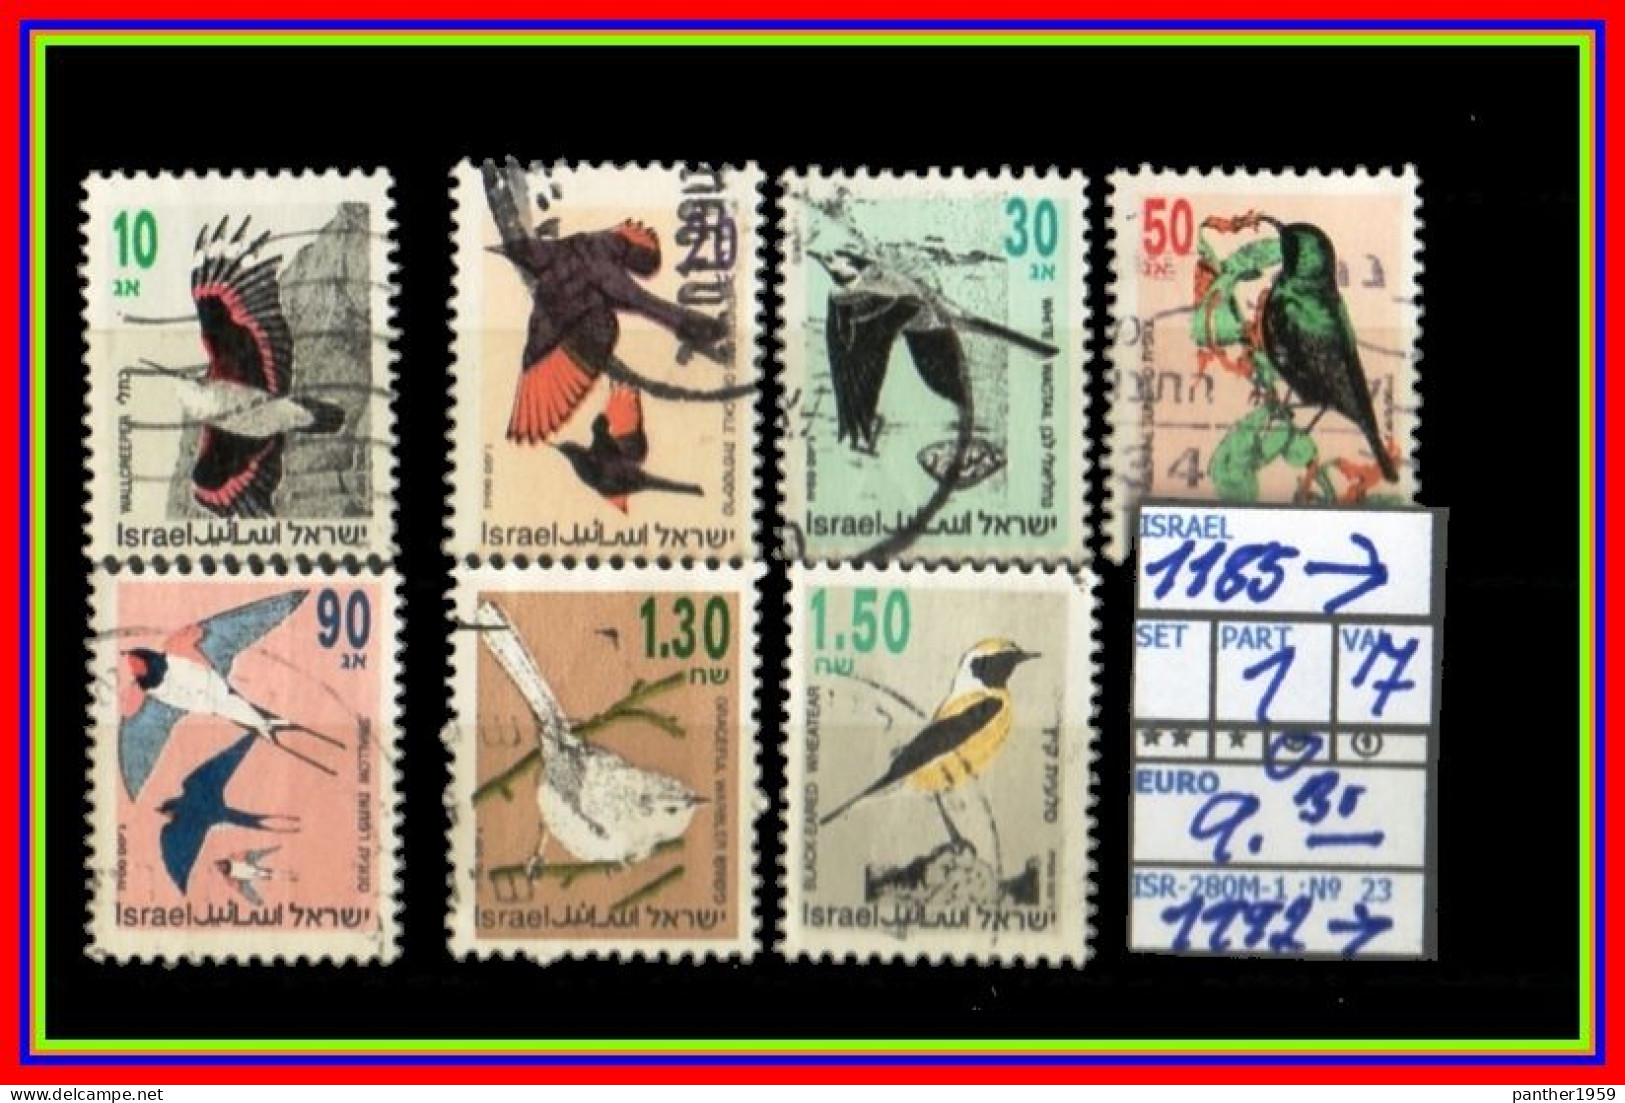 ASIA# ISRAEL# REPUBLIC#DEFINITVES#PARTIAL SET# USED# (ISR-280M-1) (23) - Used Stamps (without Tabs)